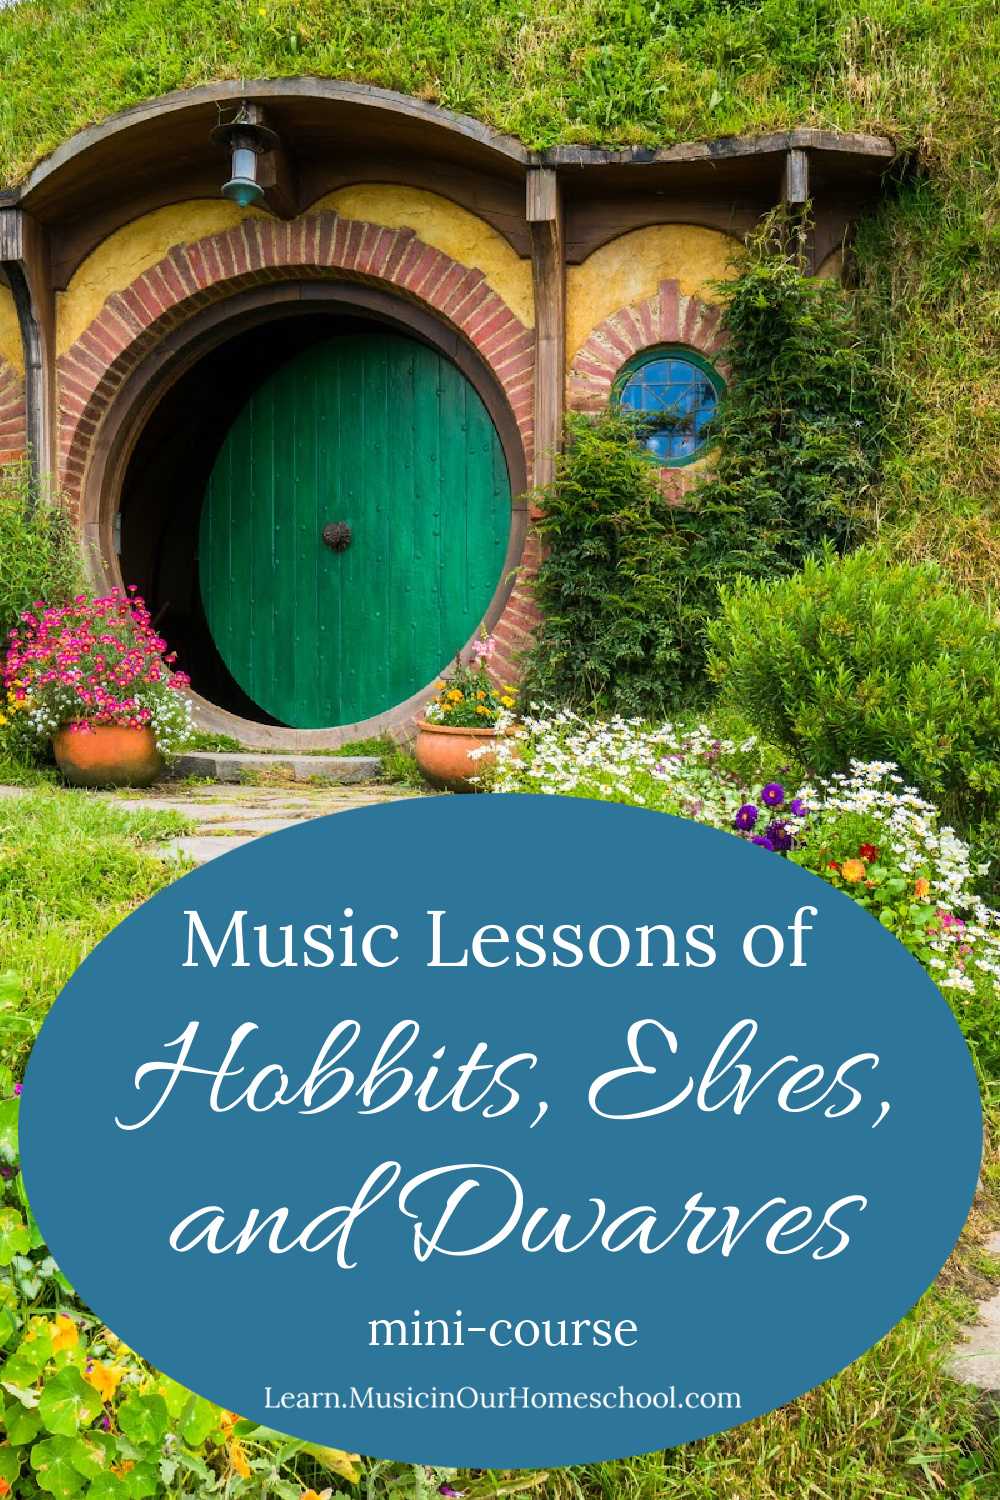 Music Lessons of Hobbits, Elves, and Dwarves mini-course